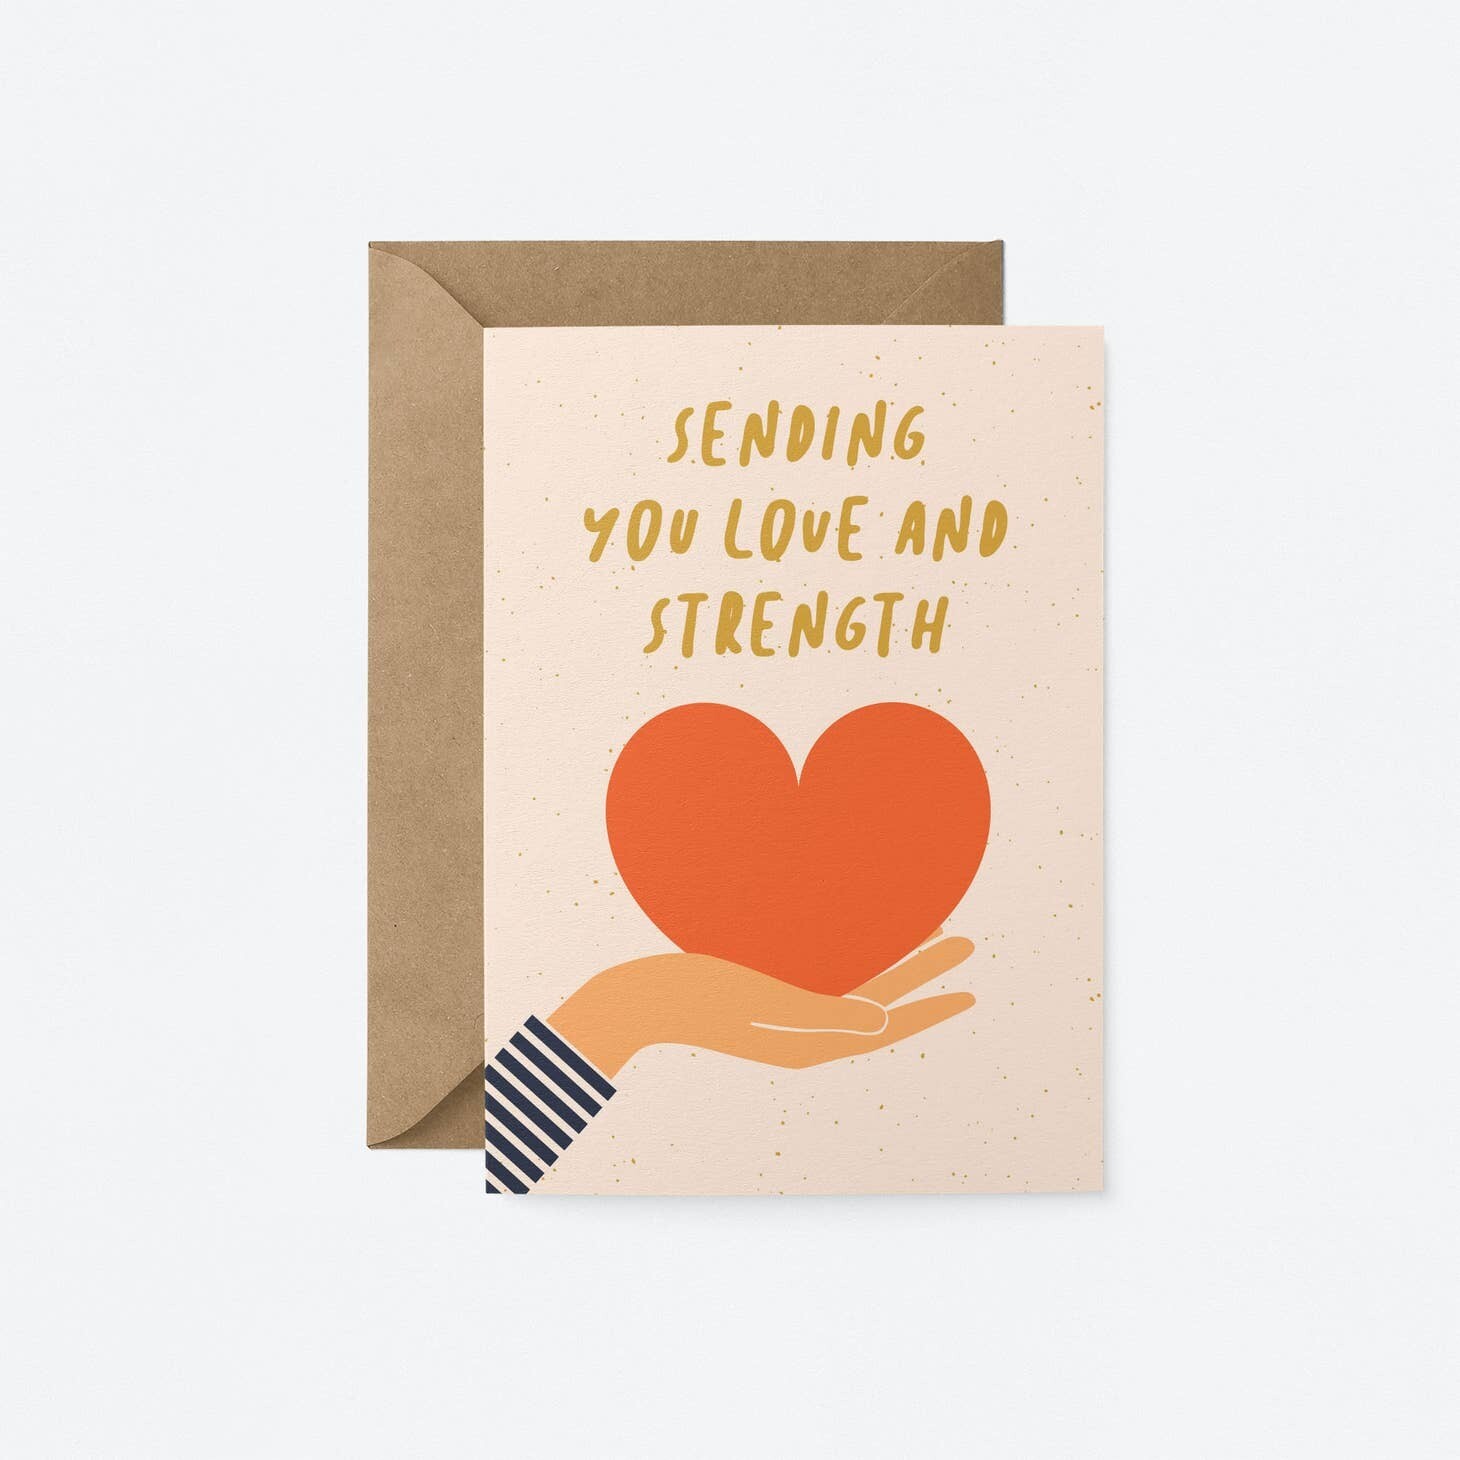 Sending You Love and Strength Card